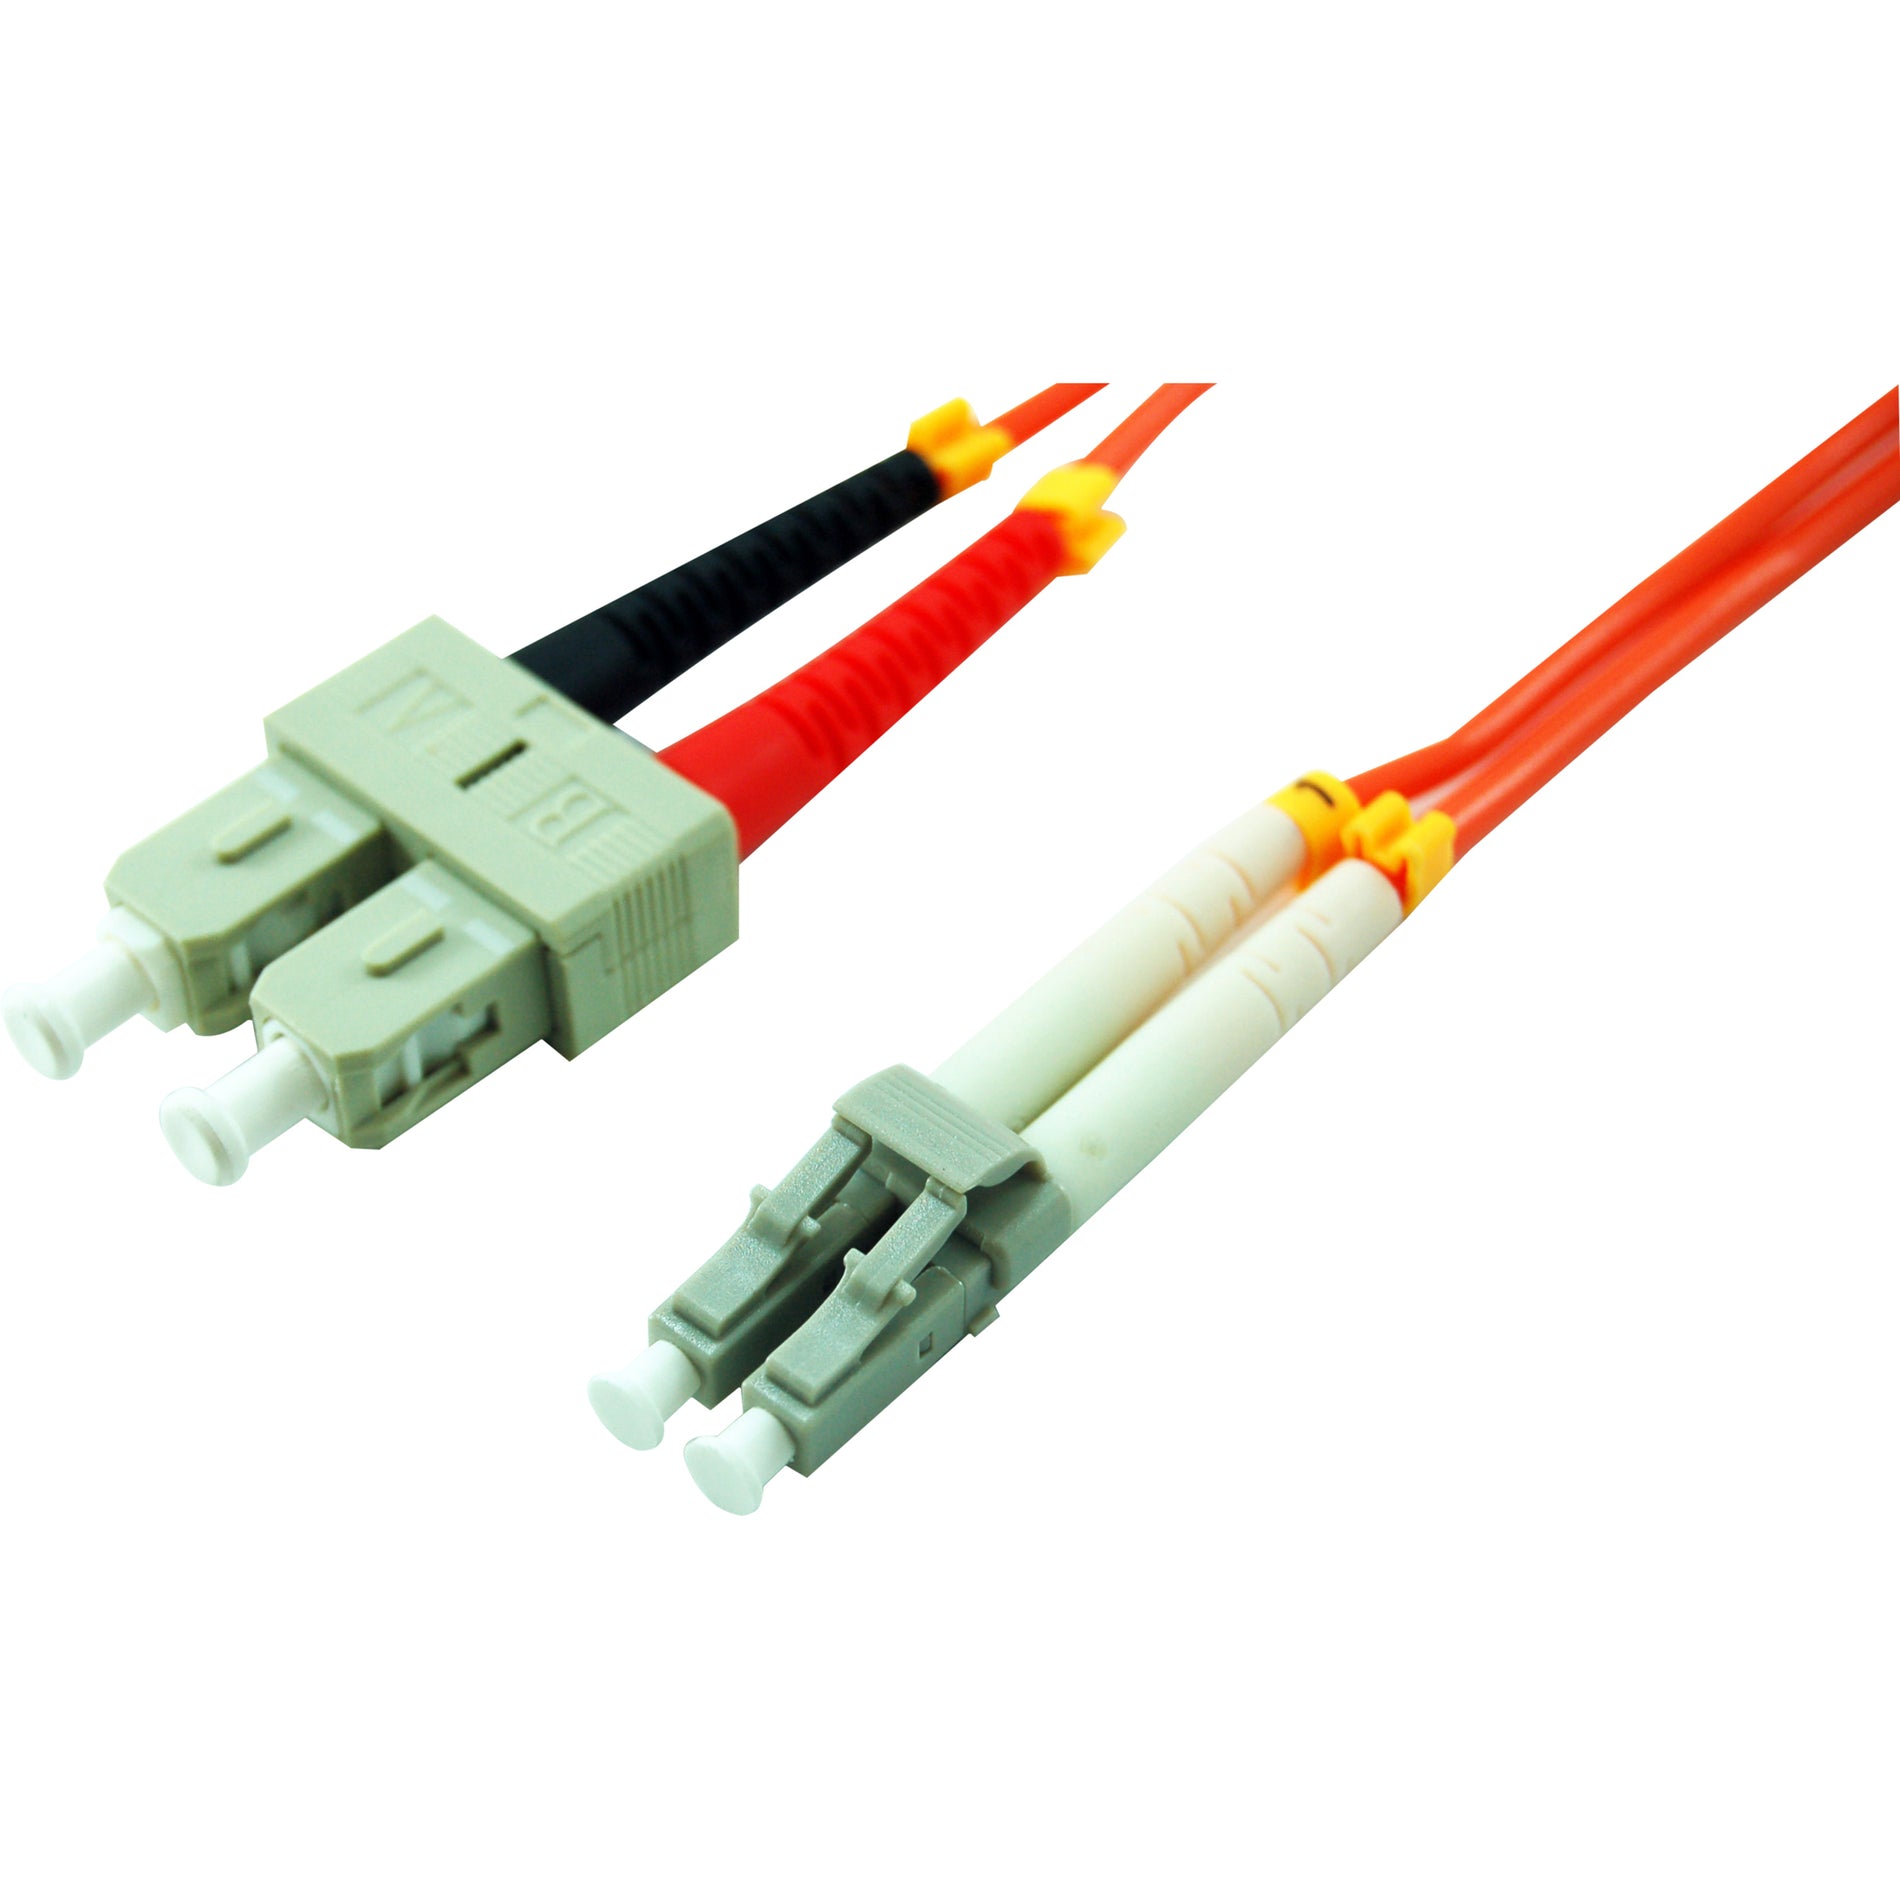 Comprehensive LC-SC-MM-10M 10M LC TO SC MM Duplex 62.5/125 Multimode Network Cable, Riser Rated, Molded, 1 Gbit/s Data Transfer Rate